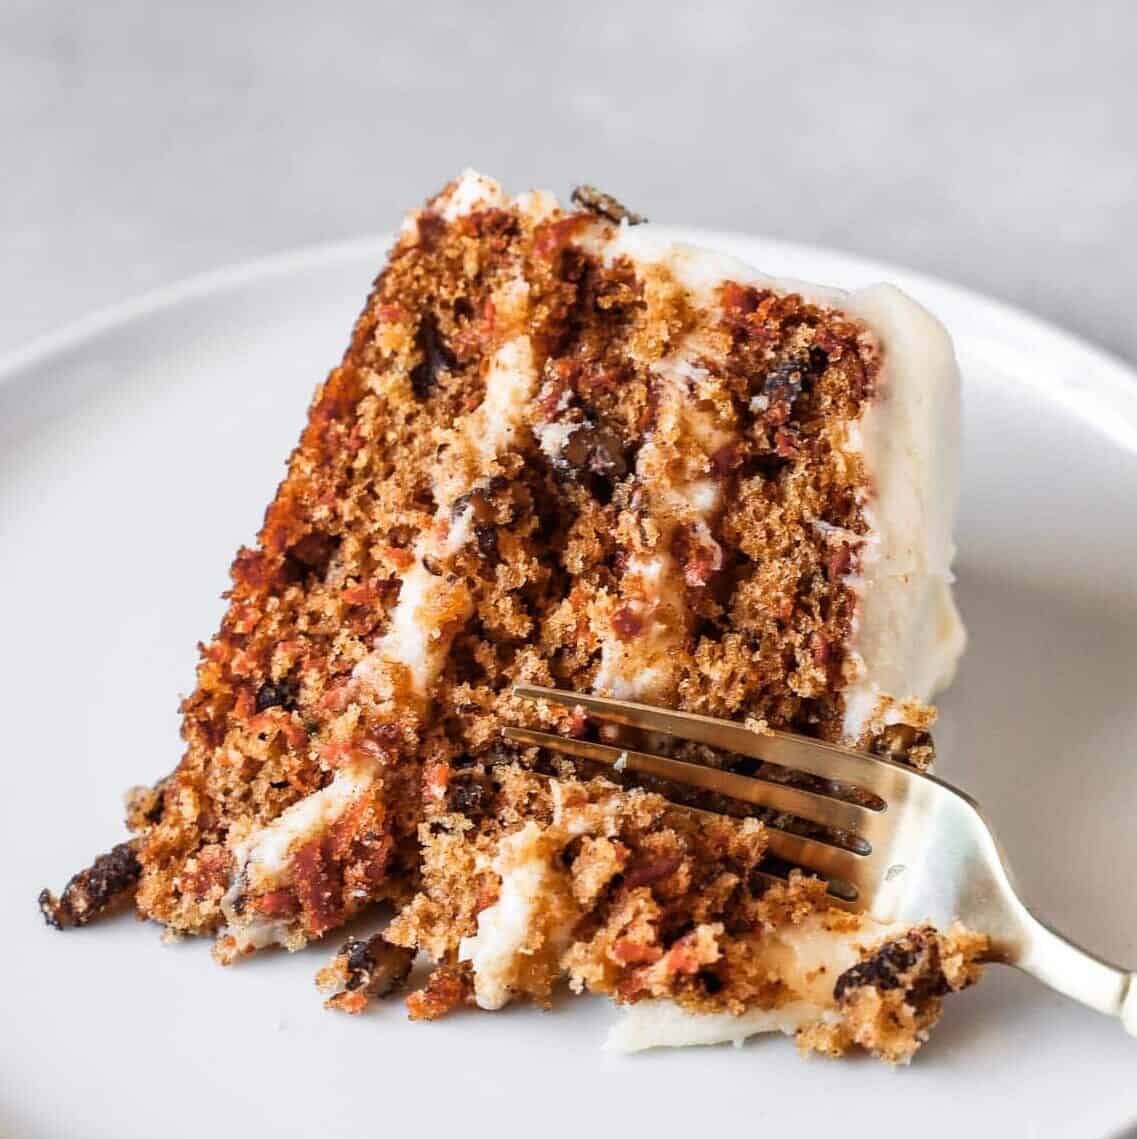 Spiced Carrot Cake with Brown Butter Cream Cheese Frosting